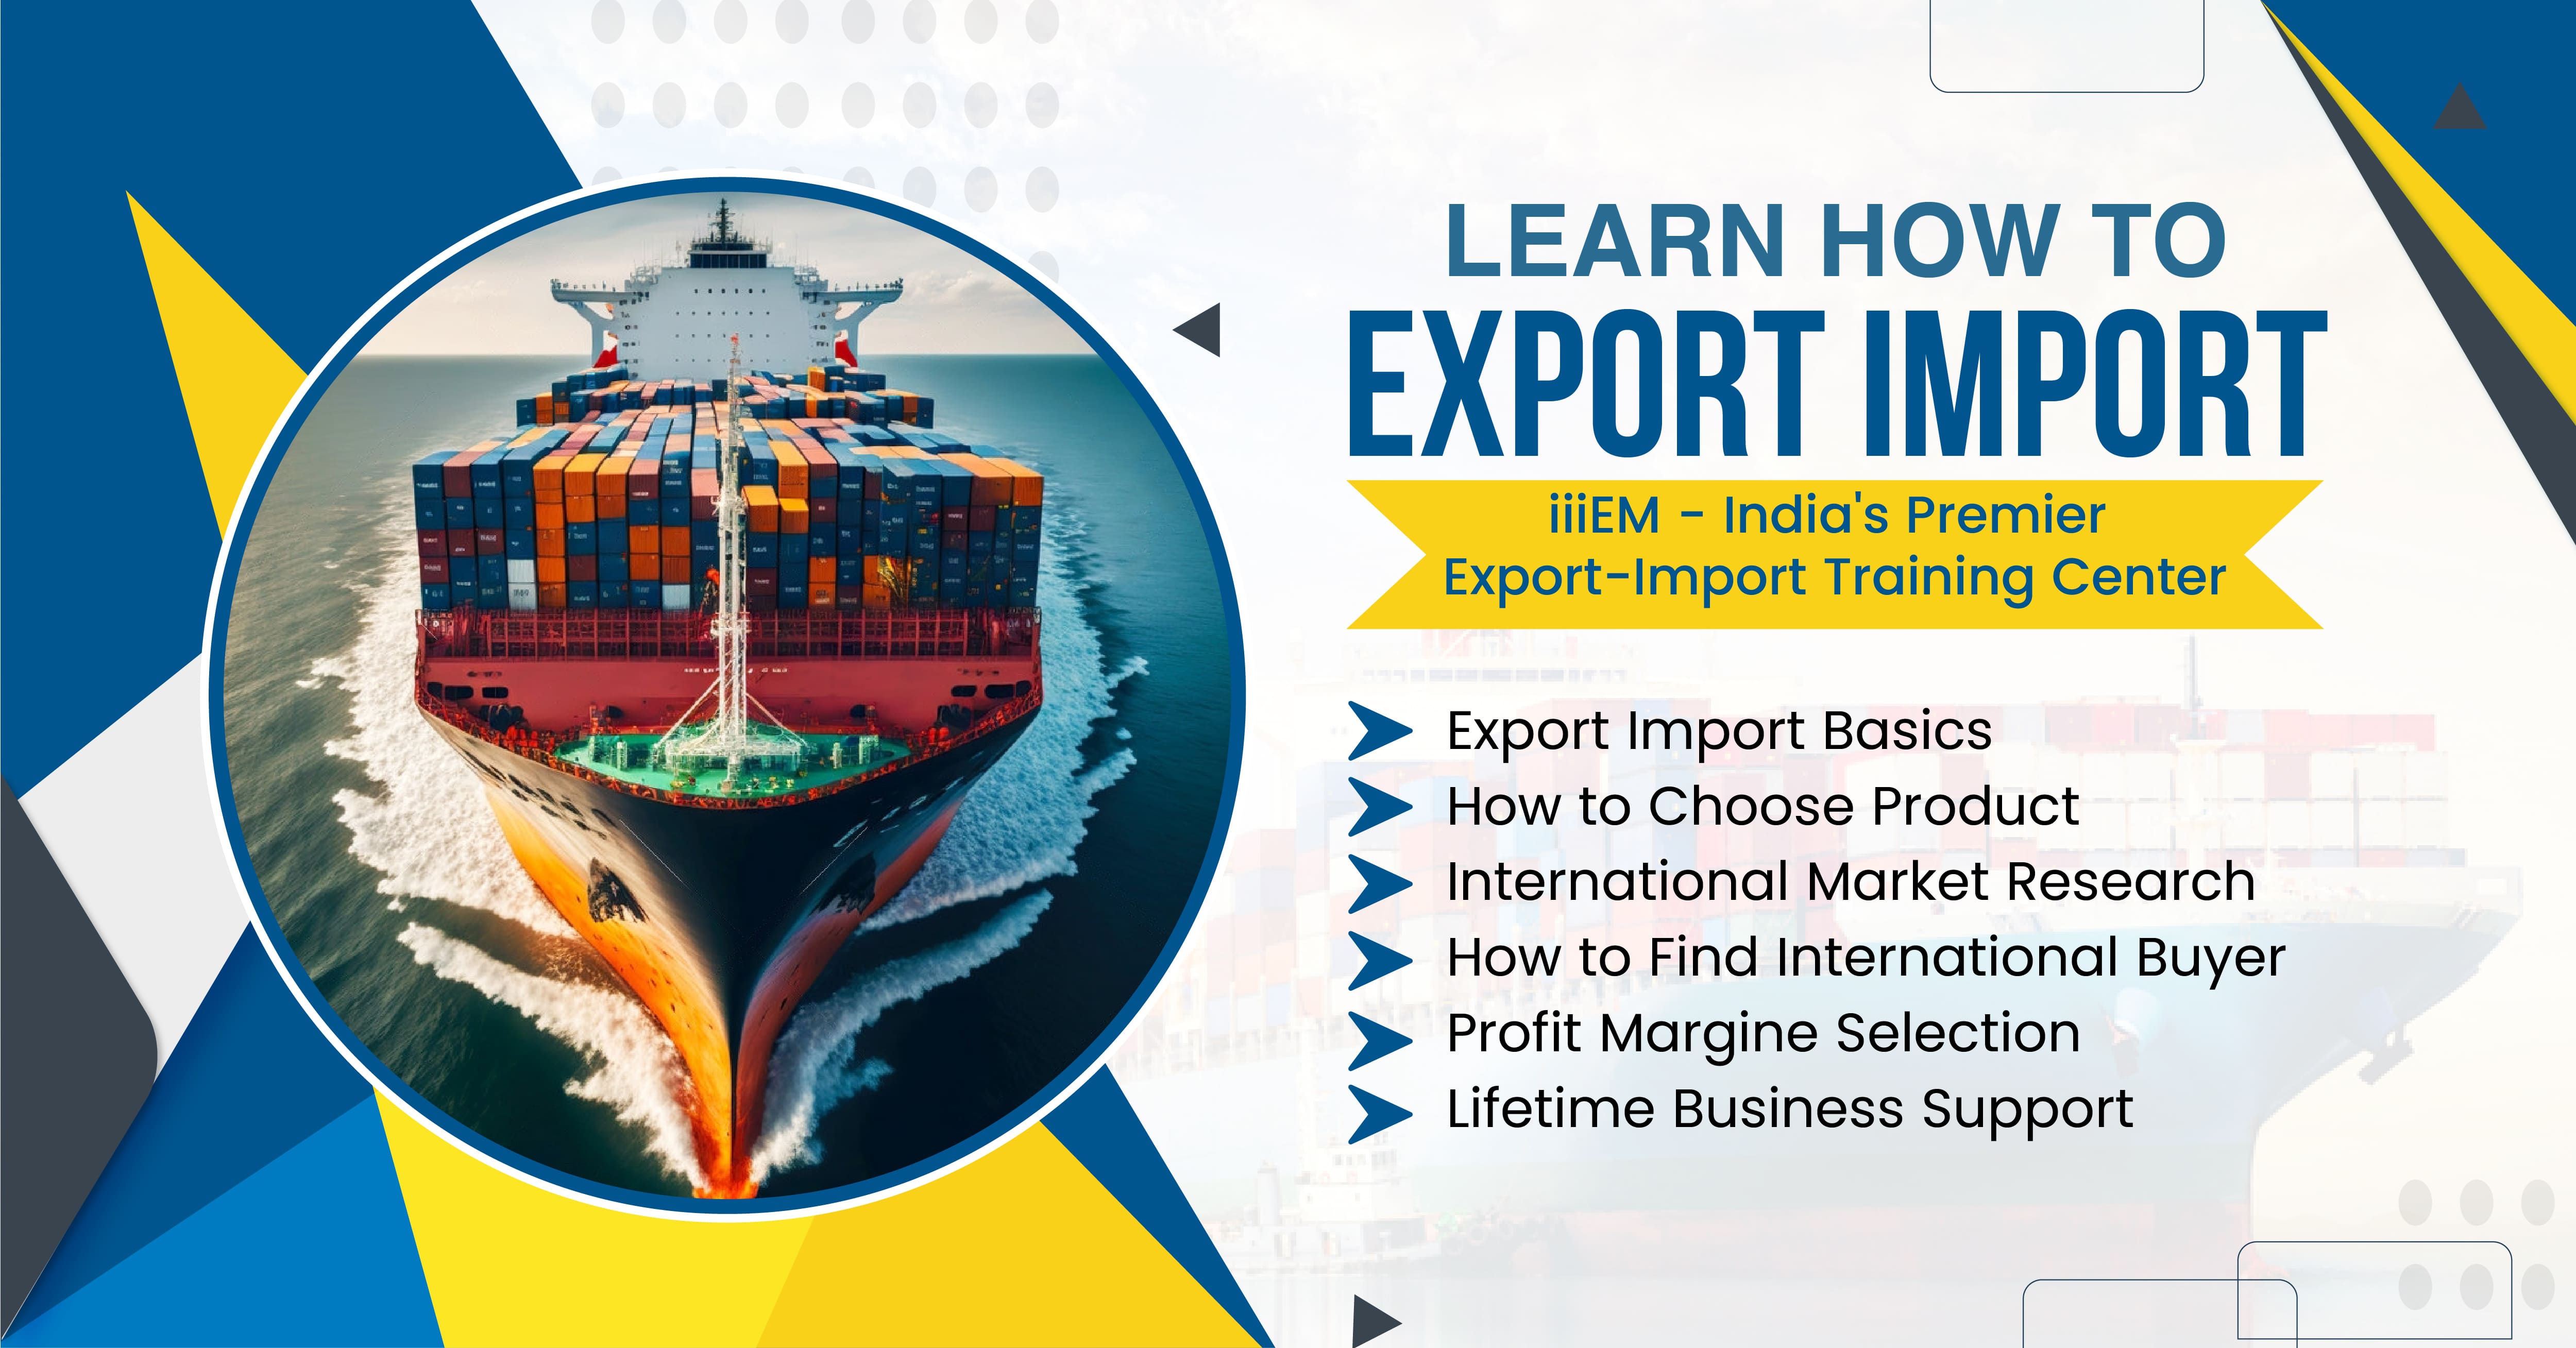 Know the Secrets to Successful Export Import Business in Udaipur, Udaipur, Rajasthan, India